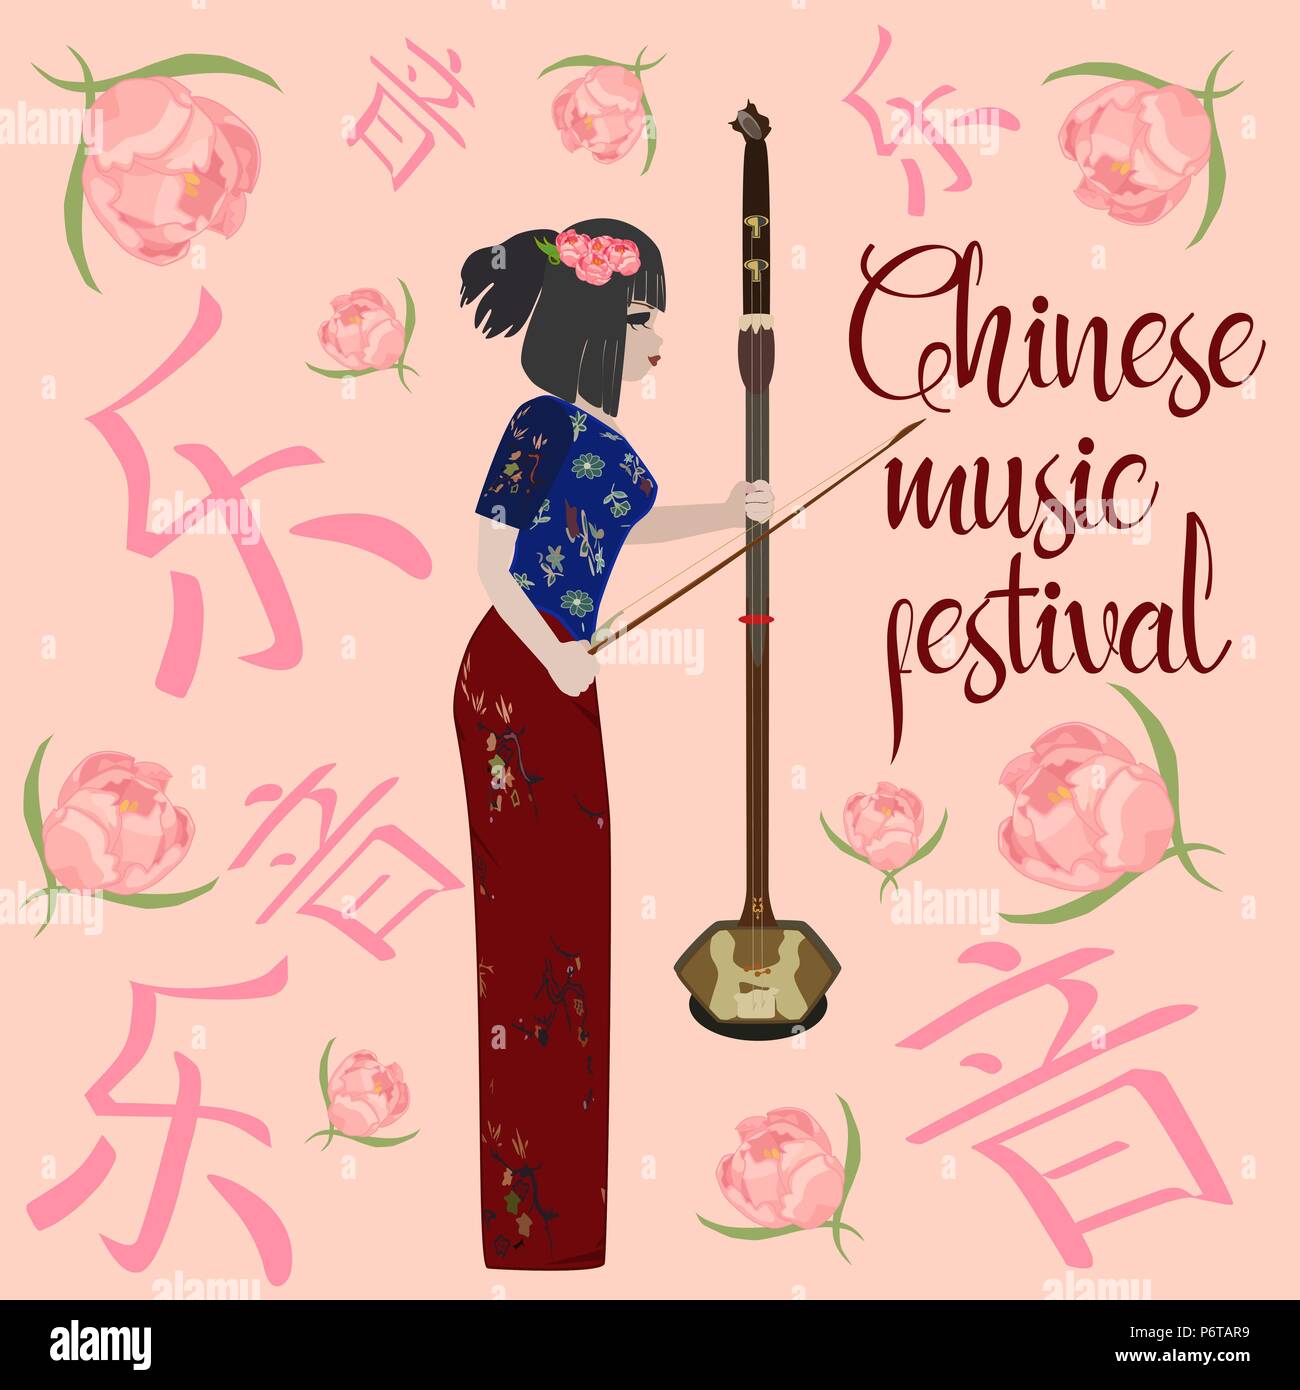 Vector chinese music festival poster template Stock Vector